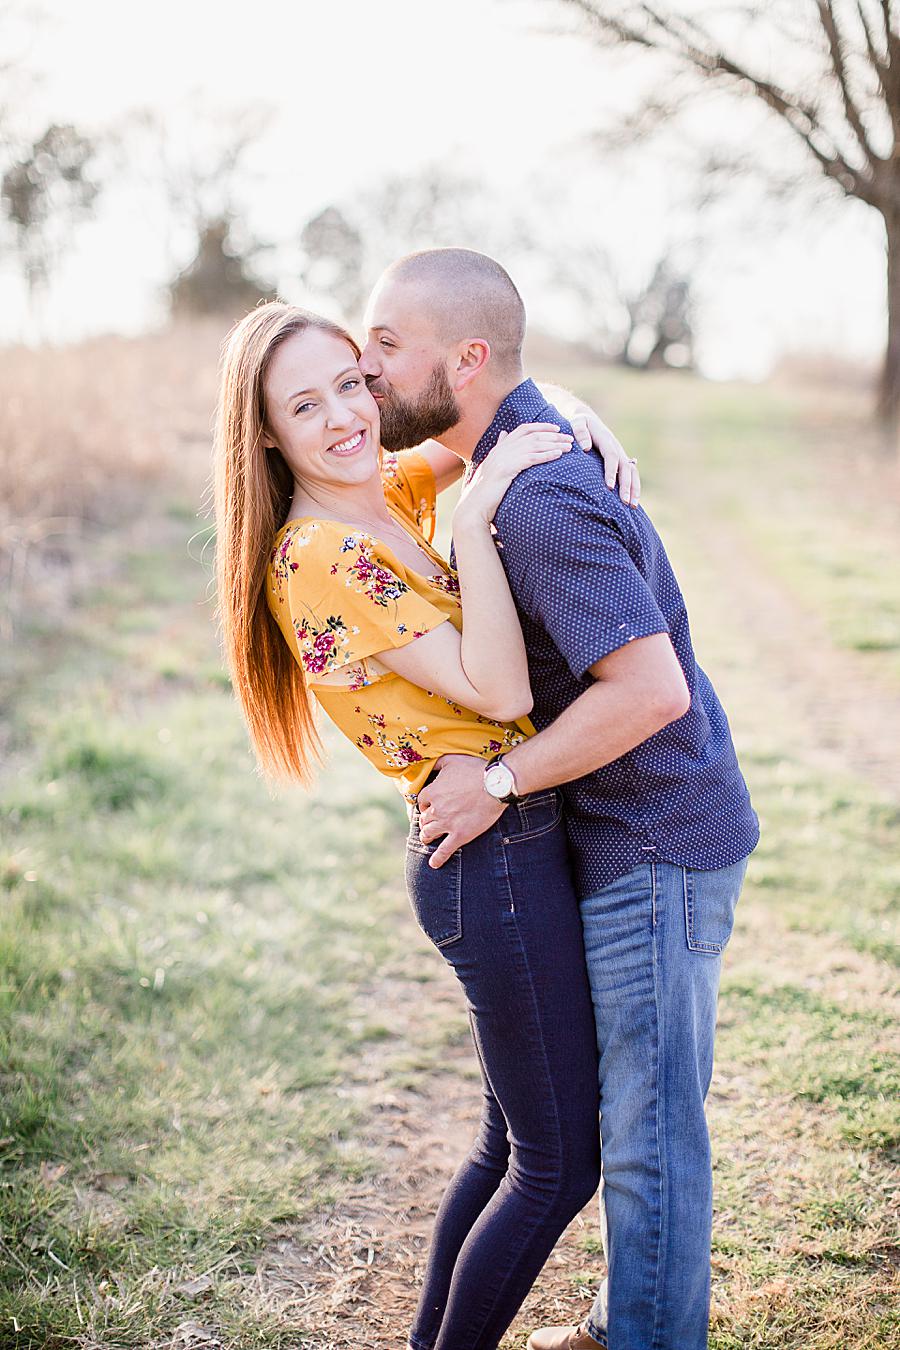 Kiss on the cheek at this Marblegate Farm engagement by Knoxville Wedding Photographer, Amanda May Photos.